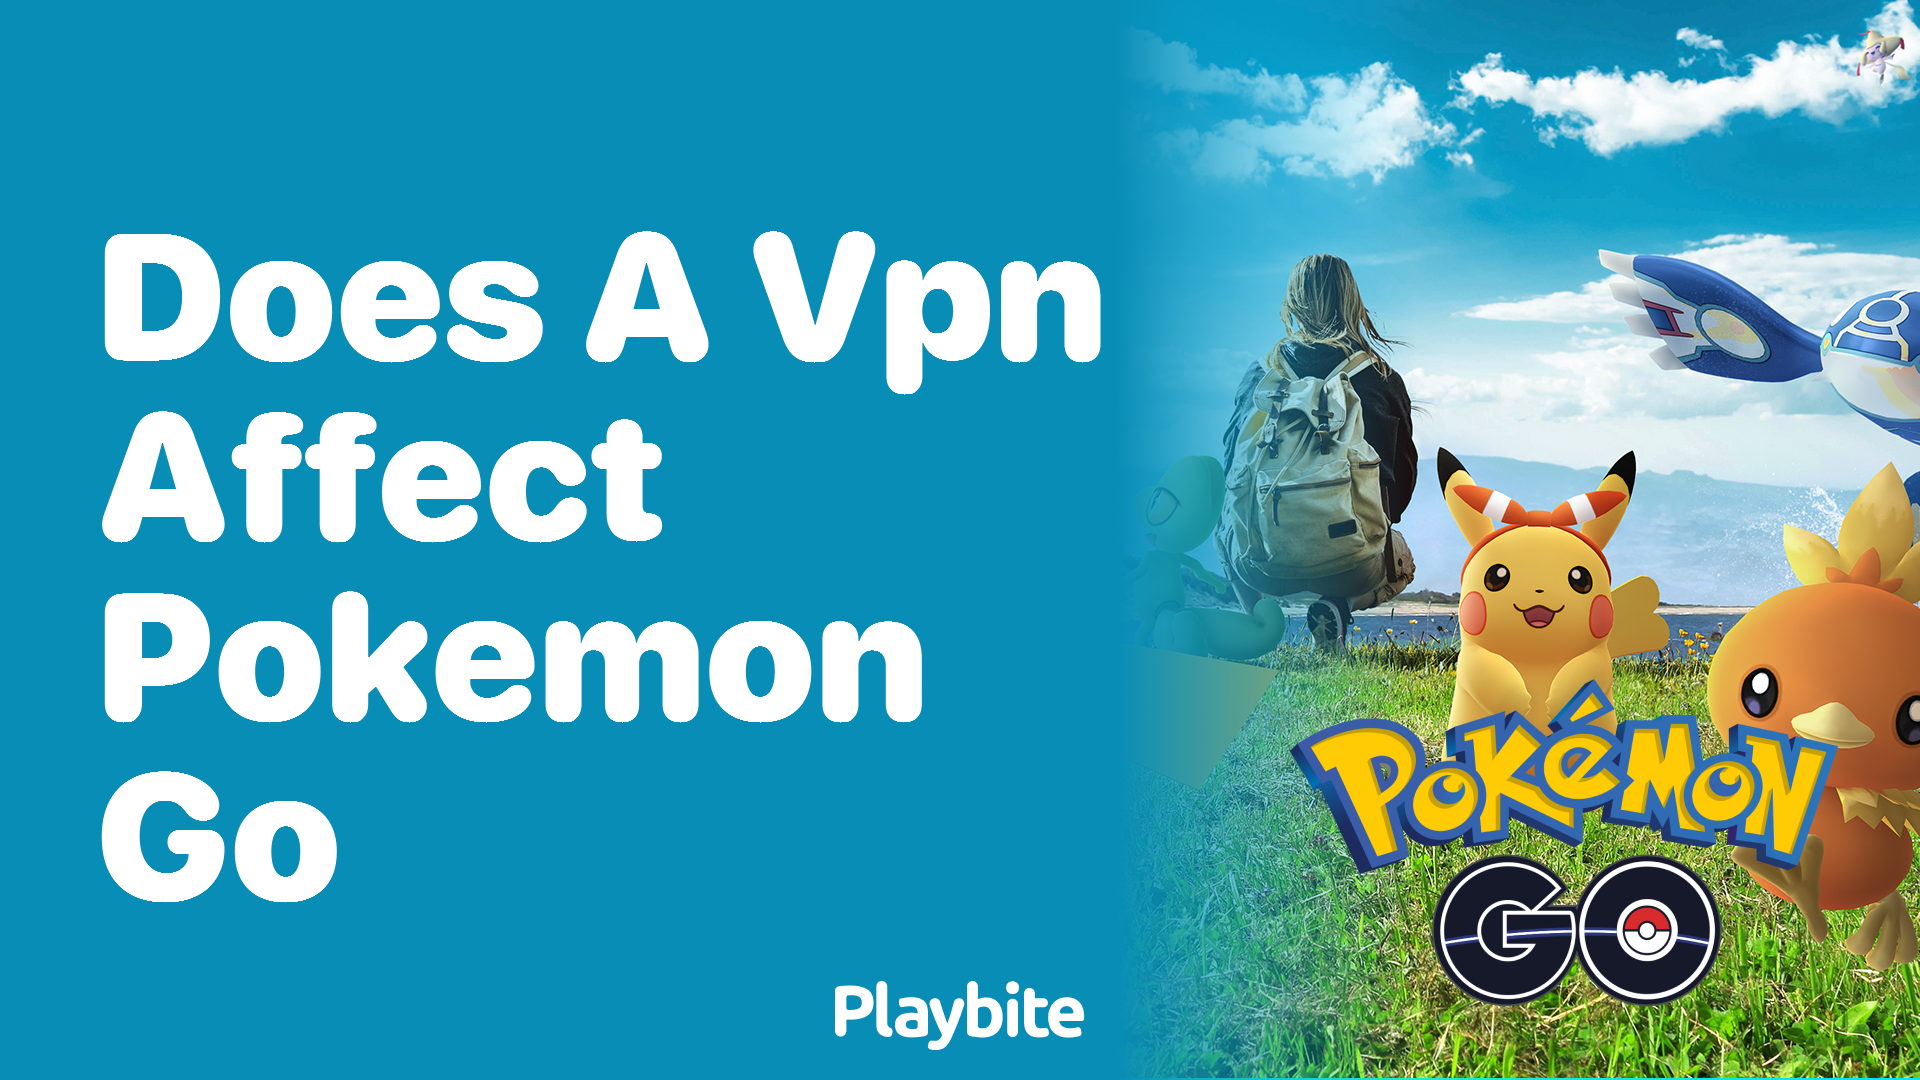 Does a VPN Affect Pokemon Go? Let's Find Out! - Playbite